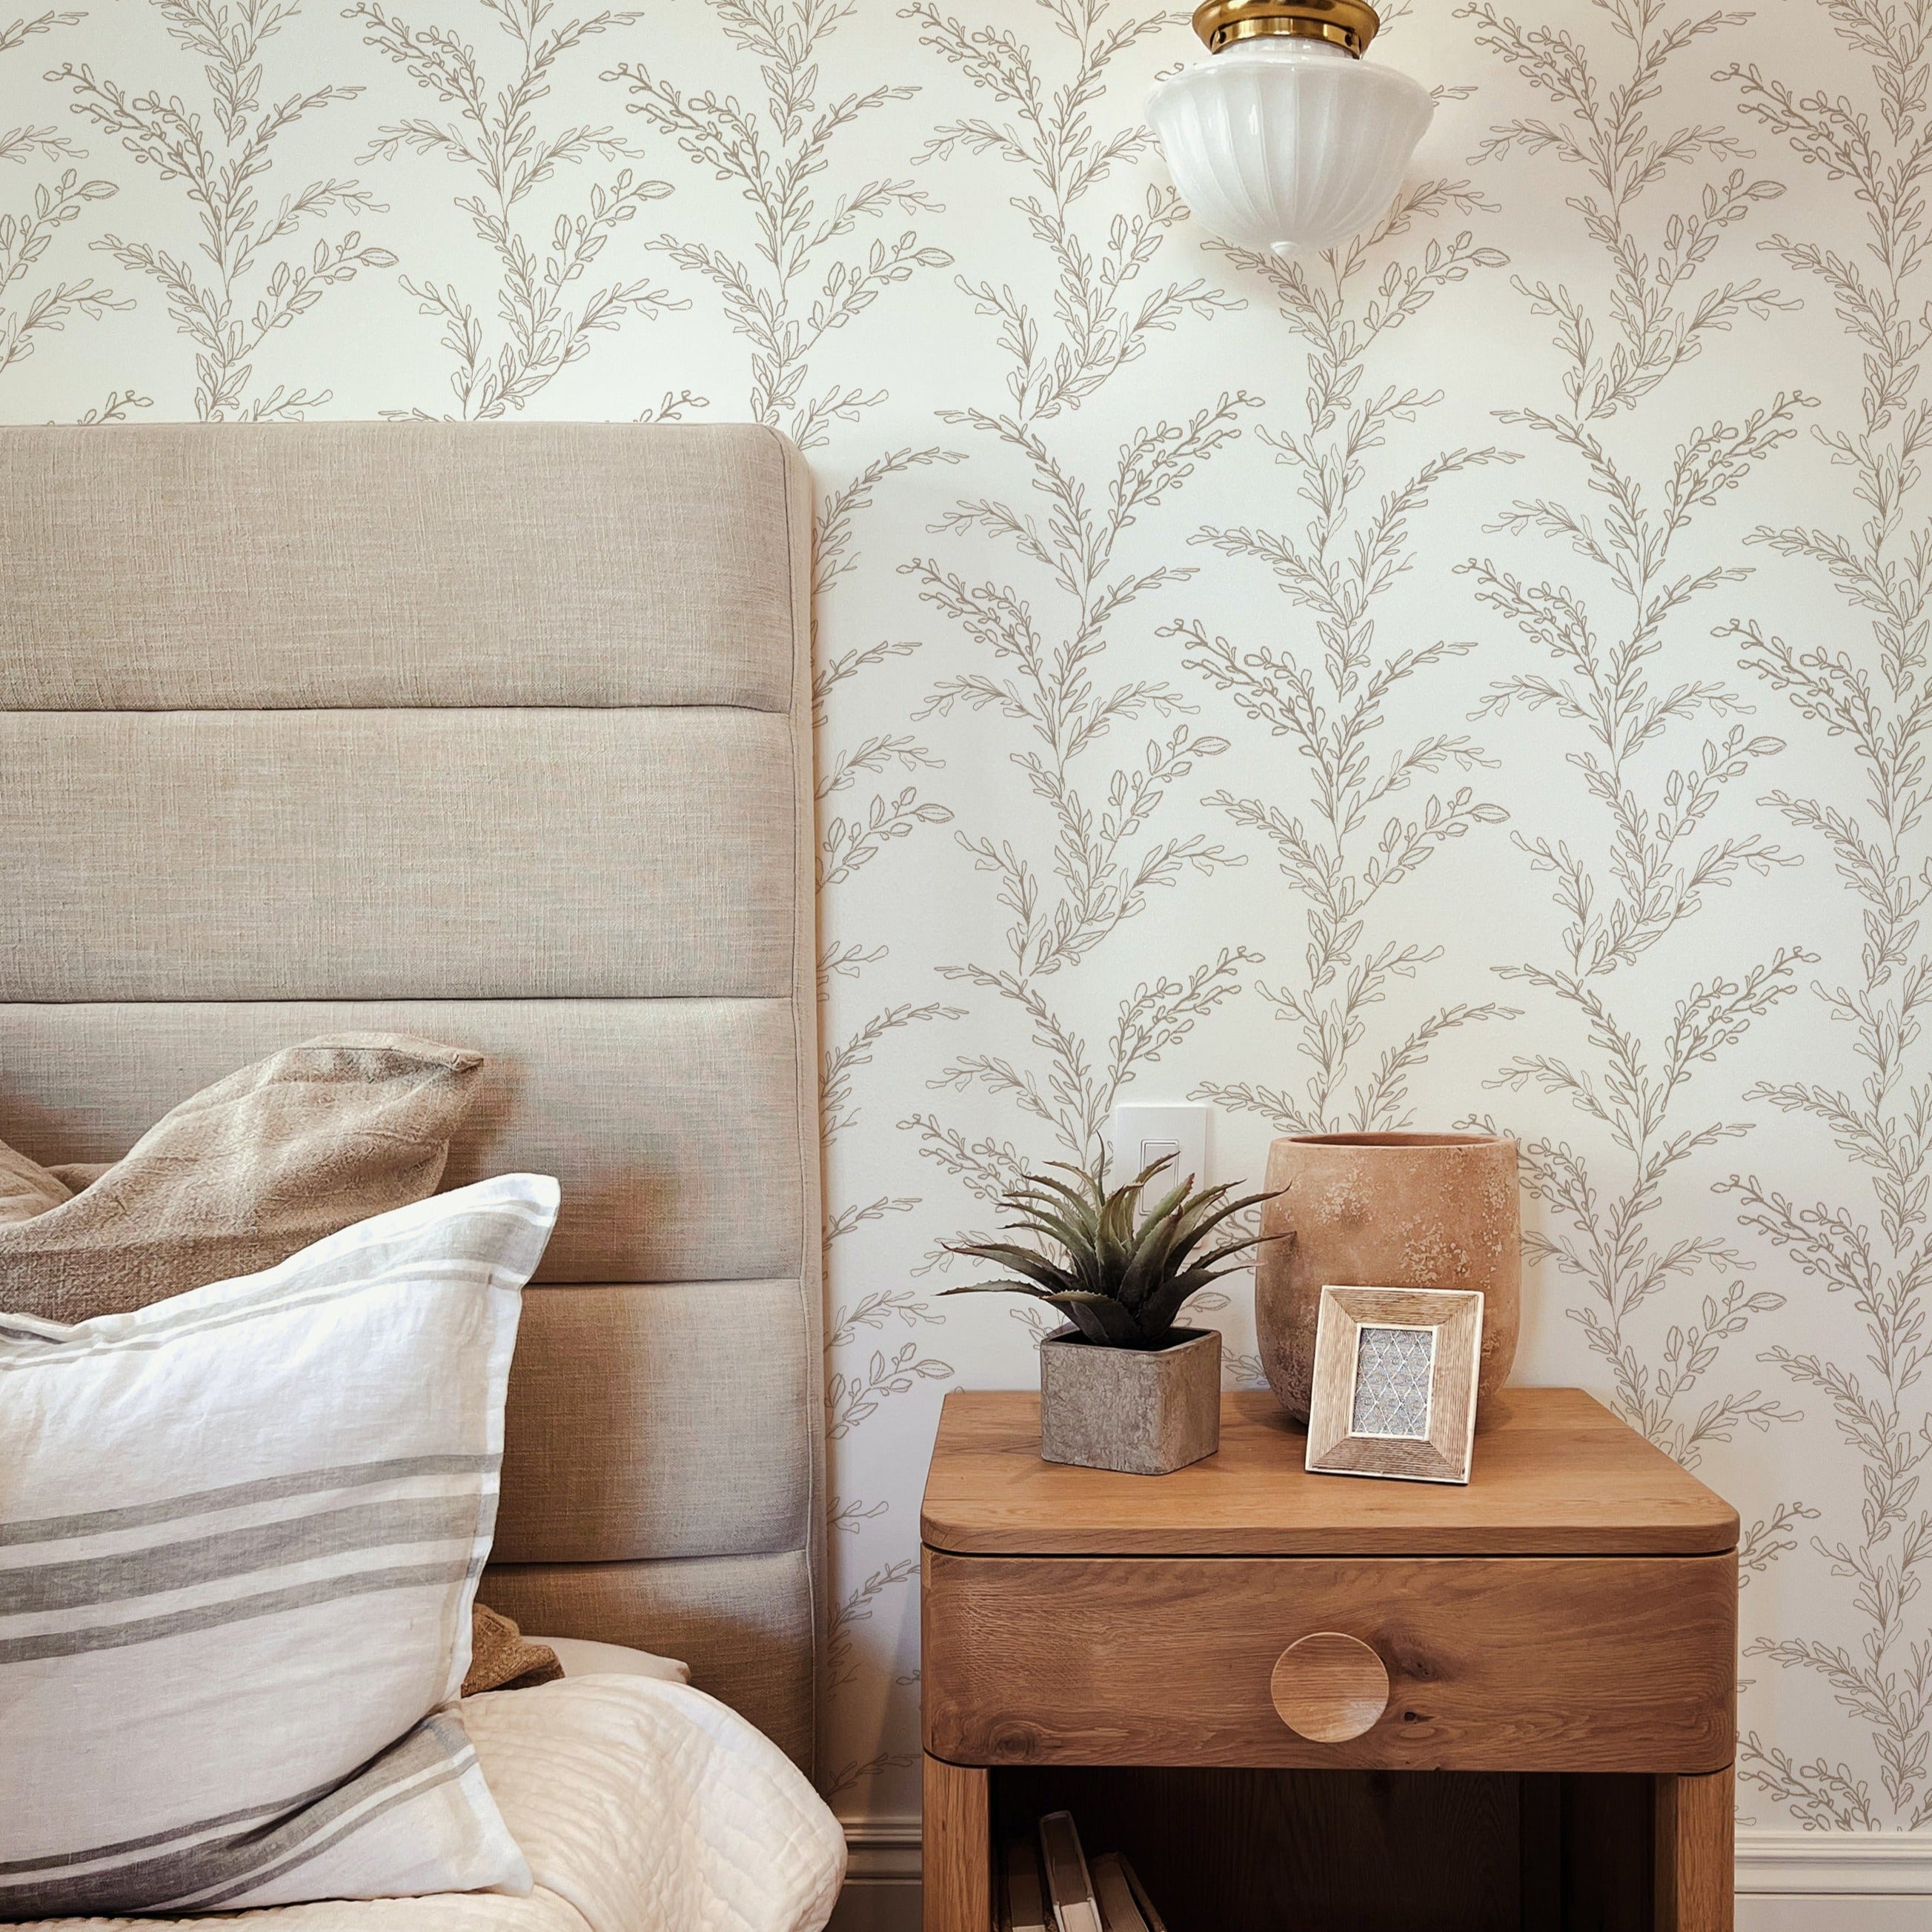 Simply Farmhouse  Farmhouse Chic wallcovering from Nilaya by Asian Paints